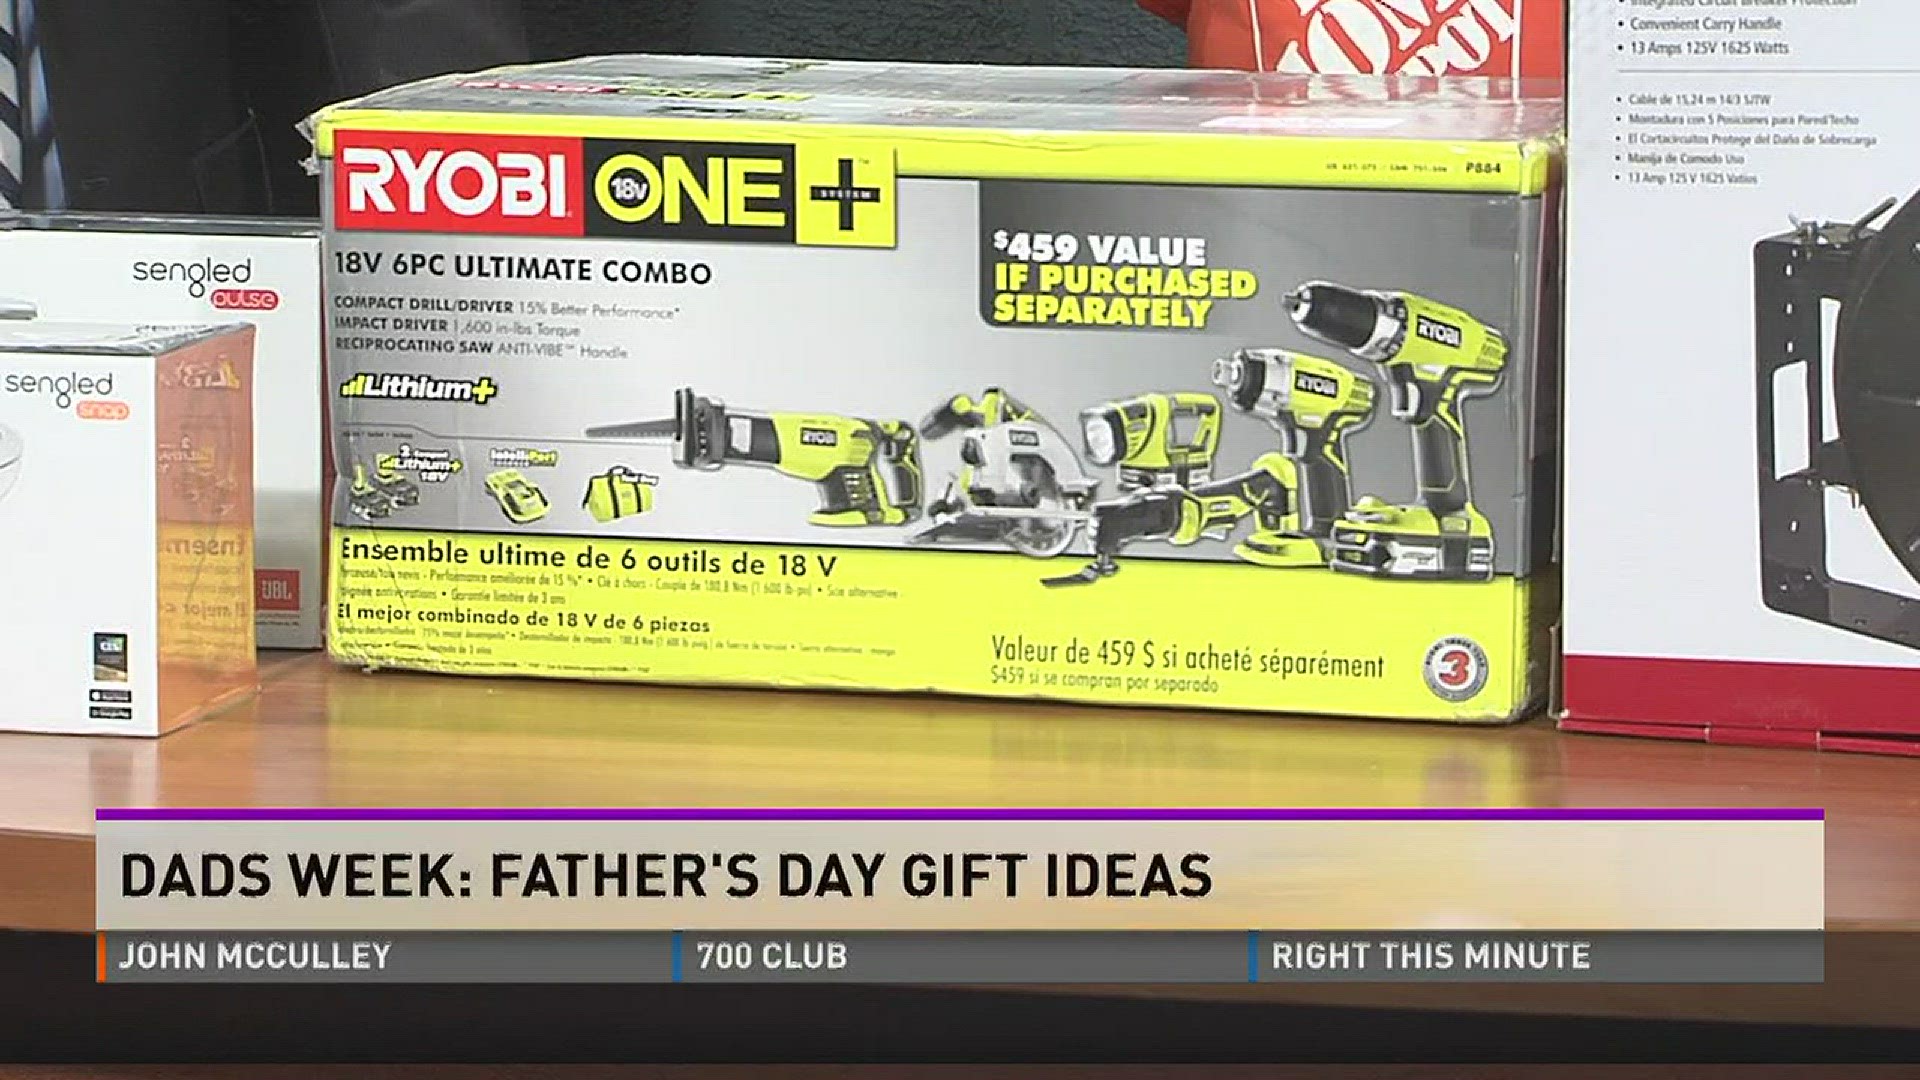 Dads Week: Father's Day Gift Ideas